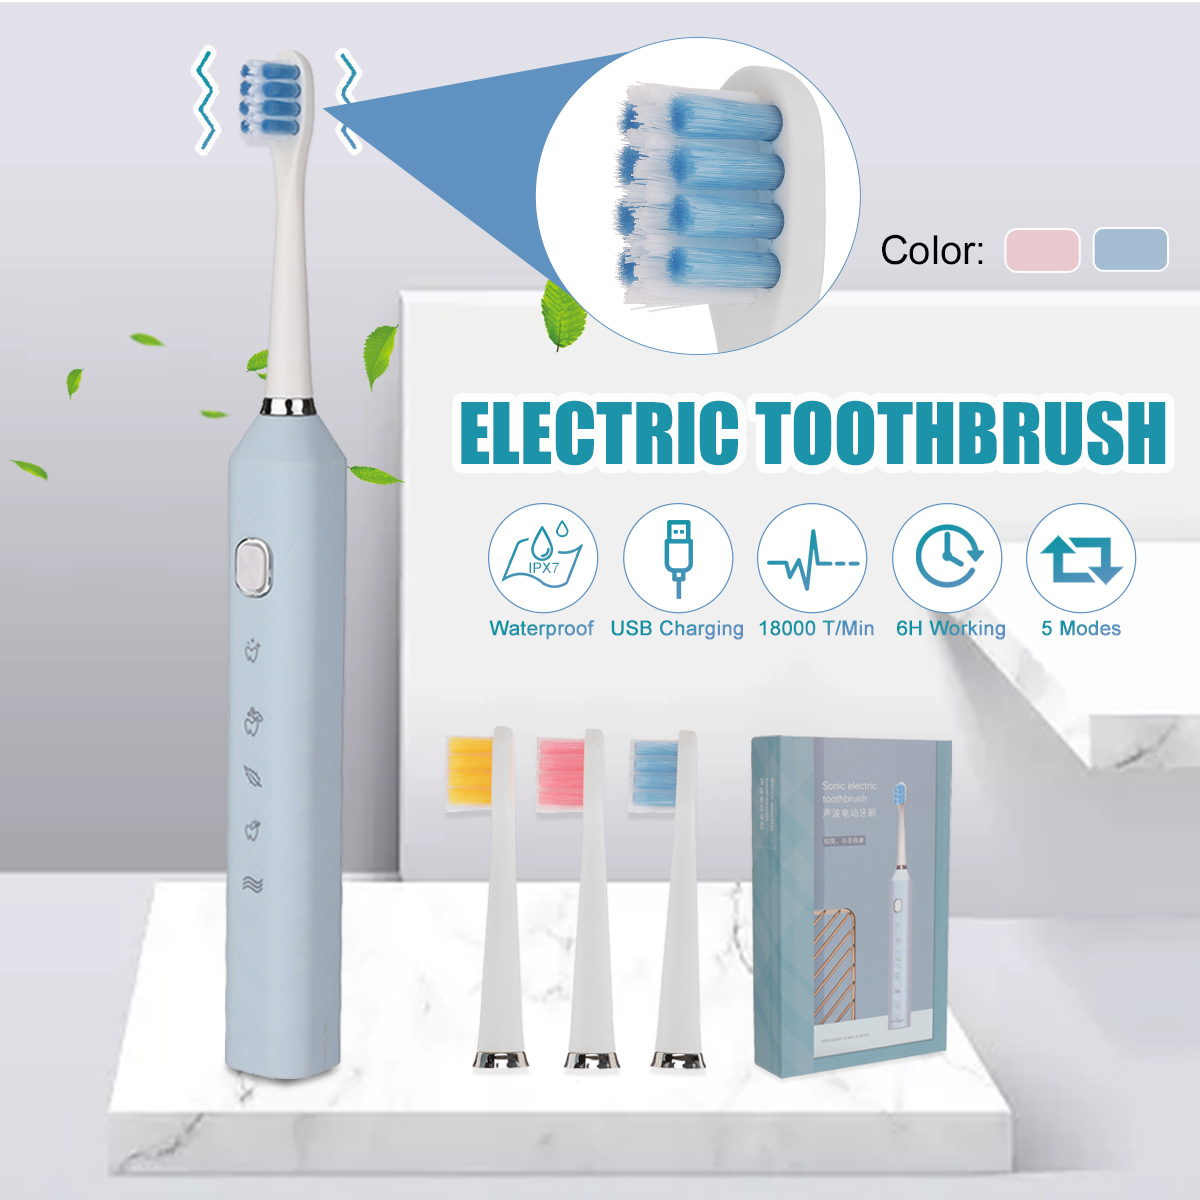 18000rpm-Electric-Toothbrush-5-Modes-Tooth-Cleaner-IPX7-Waterproof-For-Above-Over-12-Years-Old-1869980-2